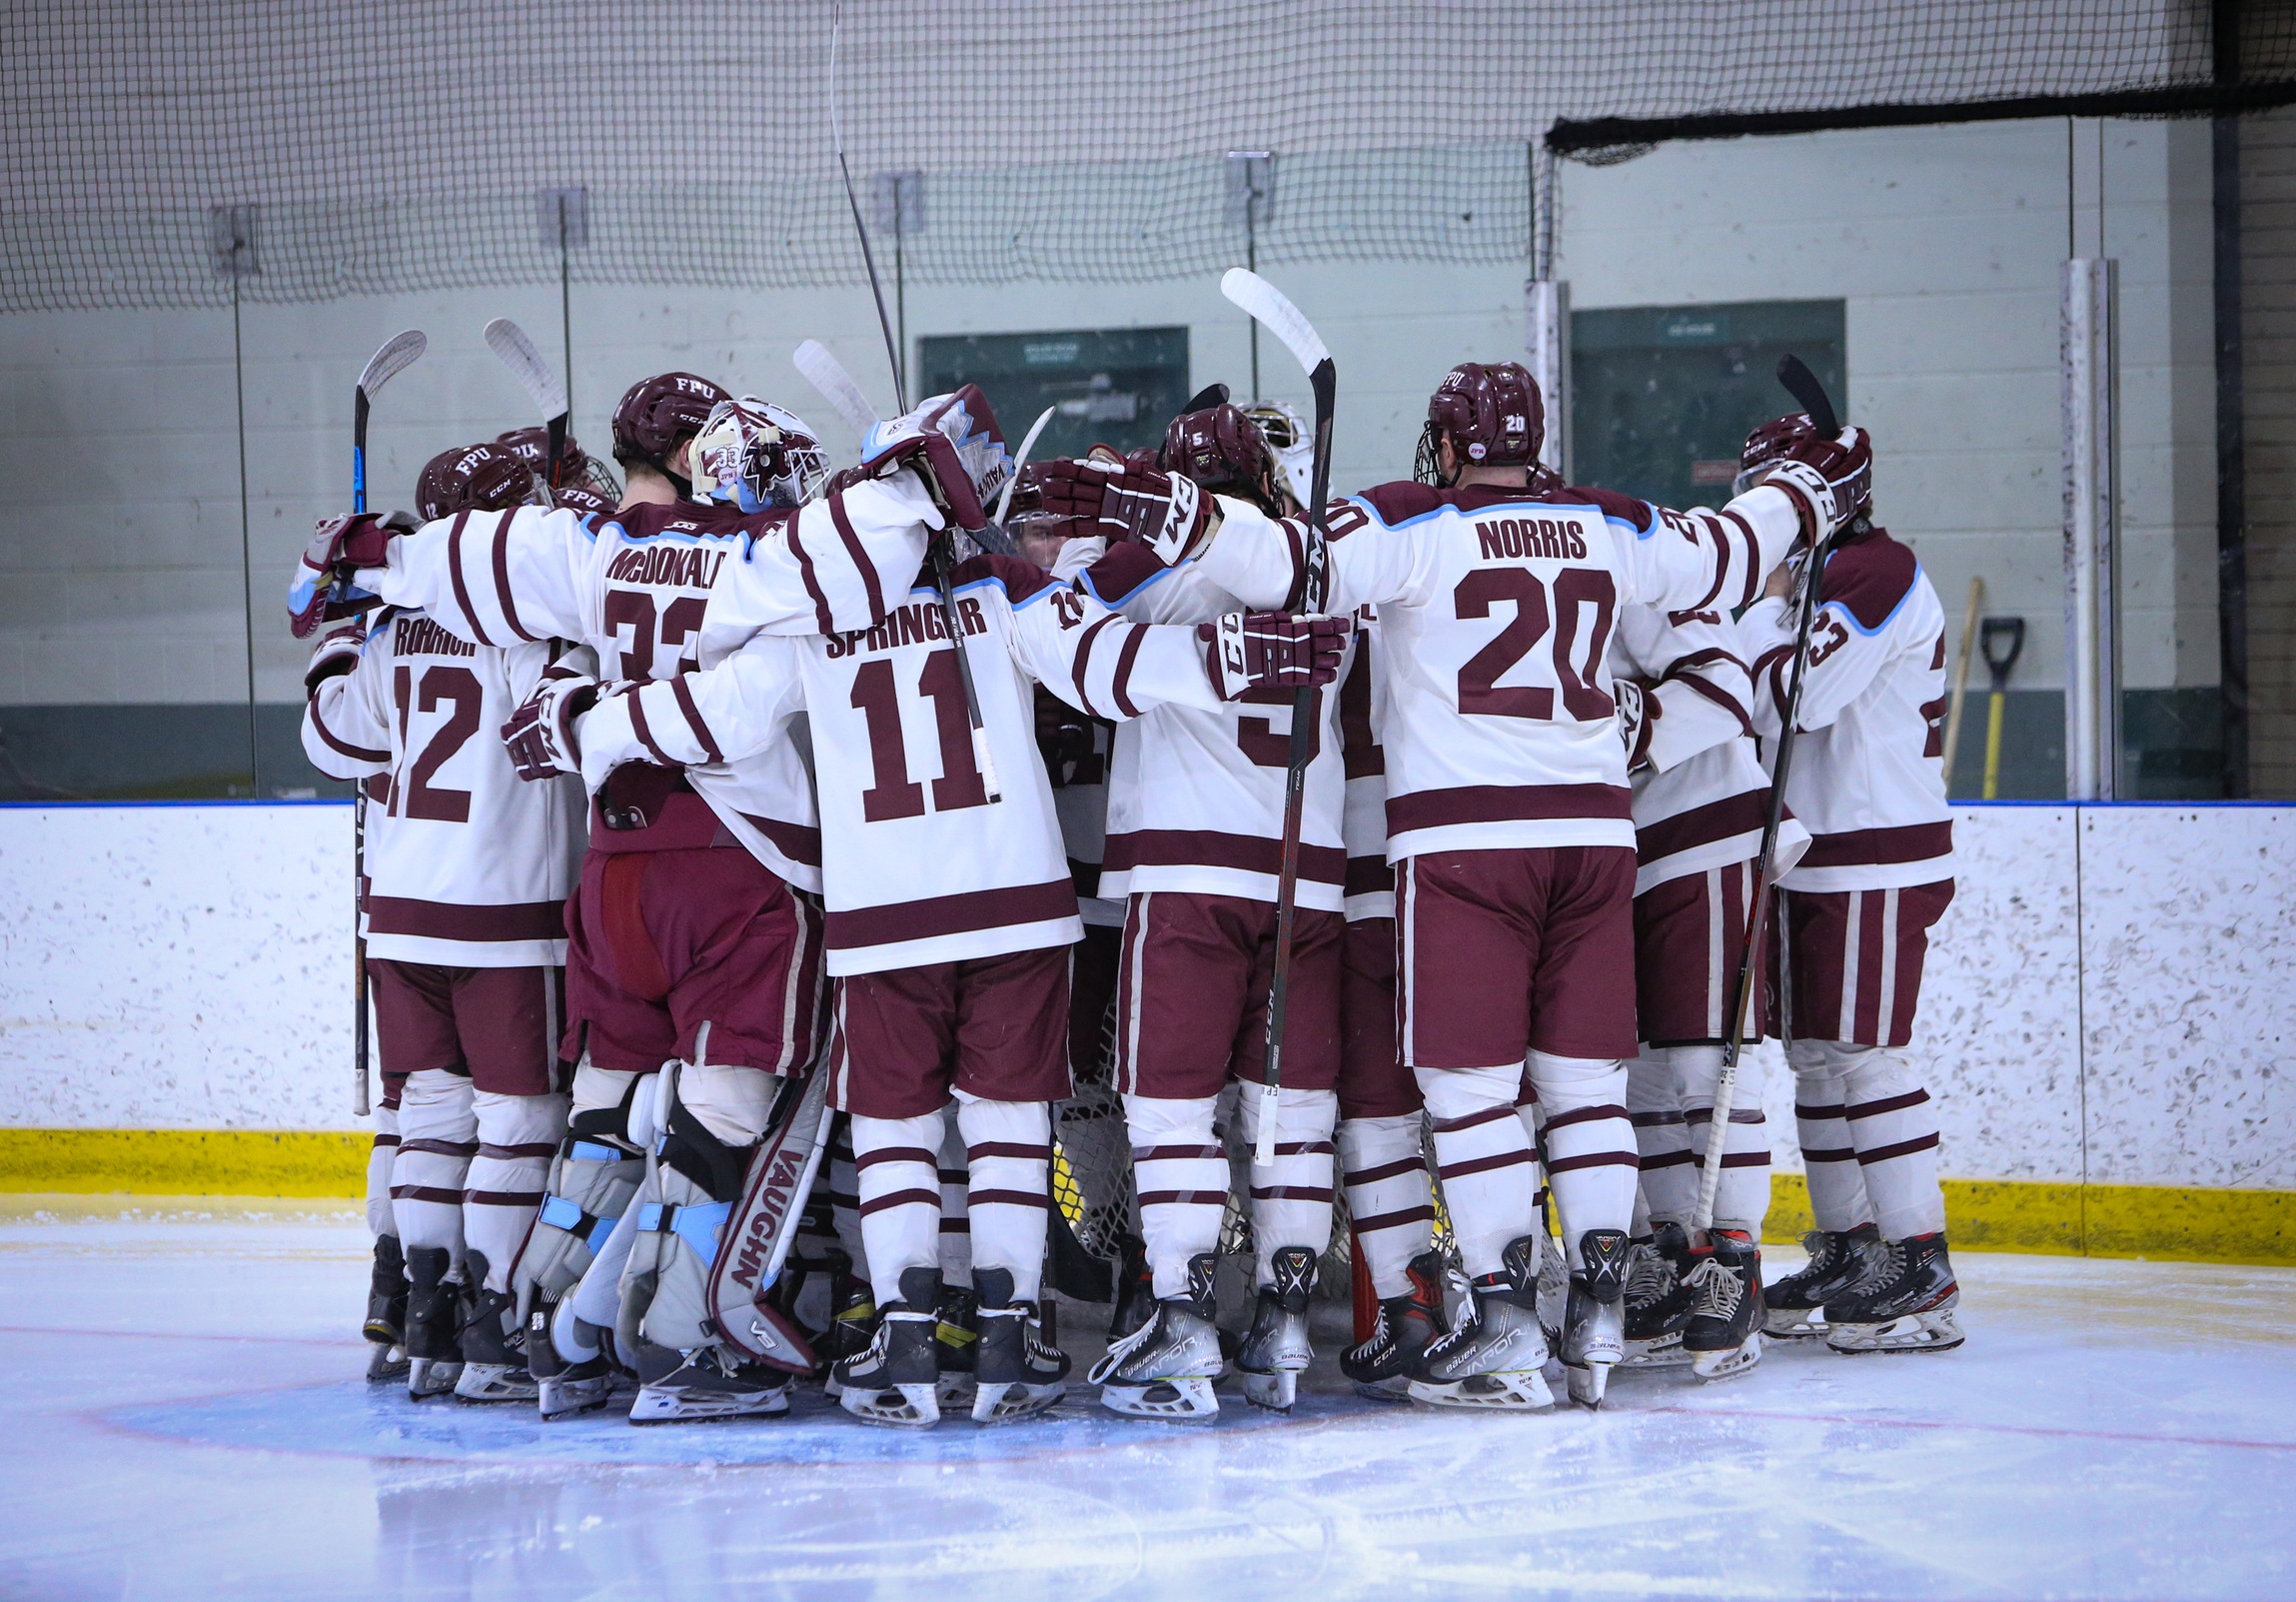 Men's Hockey Season Ends with 5-0 Loss to Saint Anselm in NE10 Semifinal